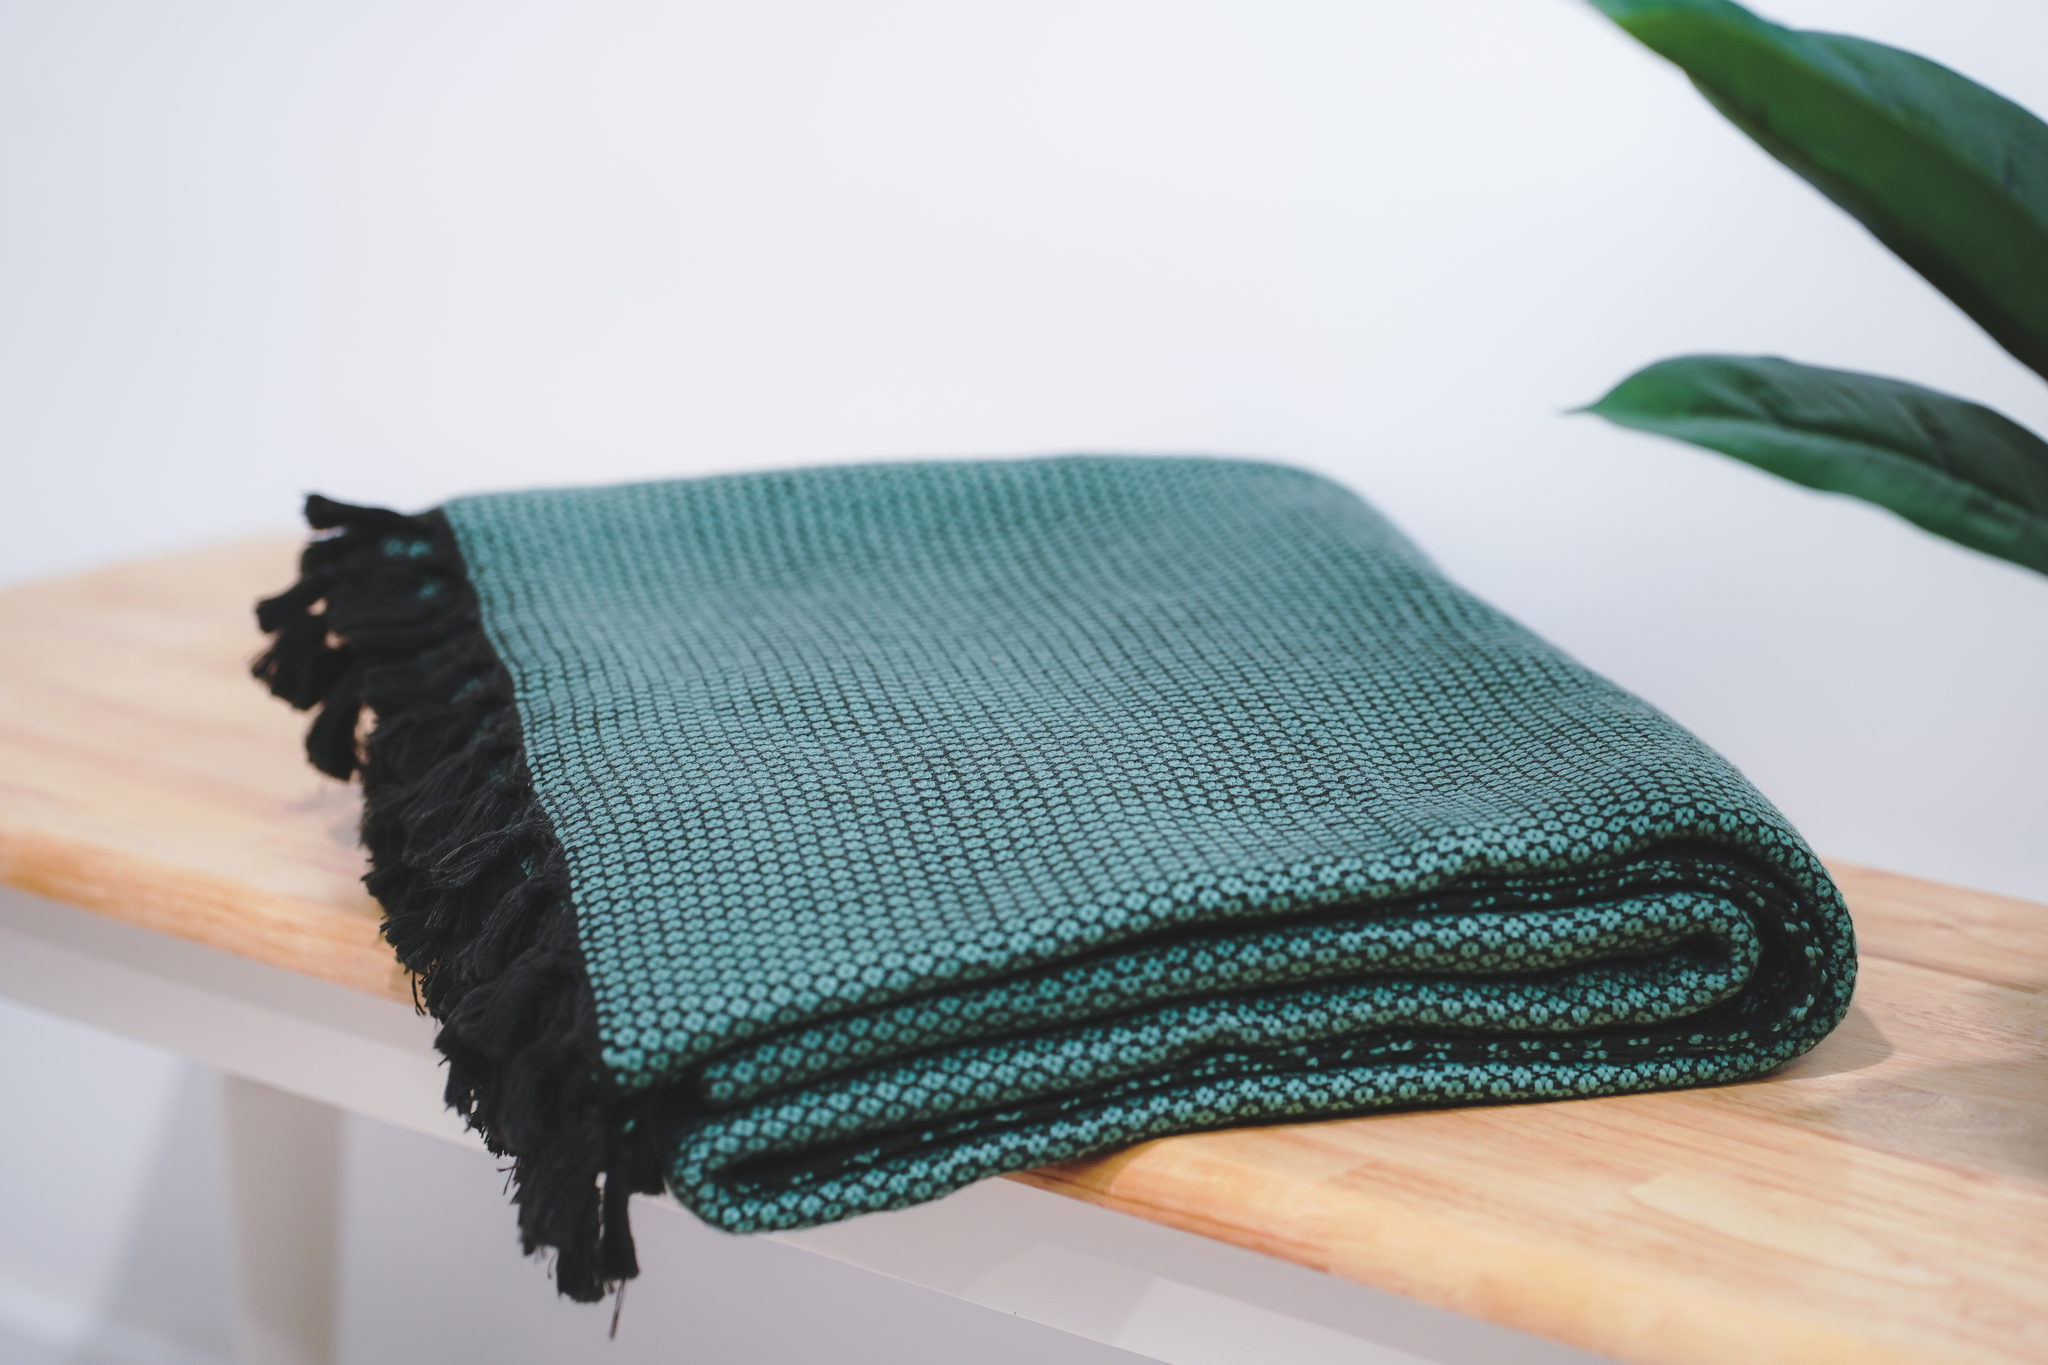 Handwoven throws with 100% cotton and all natural dyes that brings comfort and style to your home.